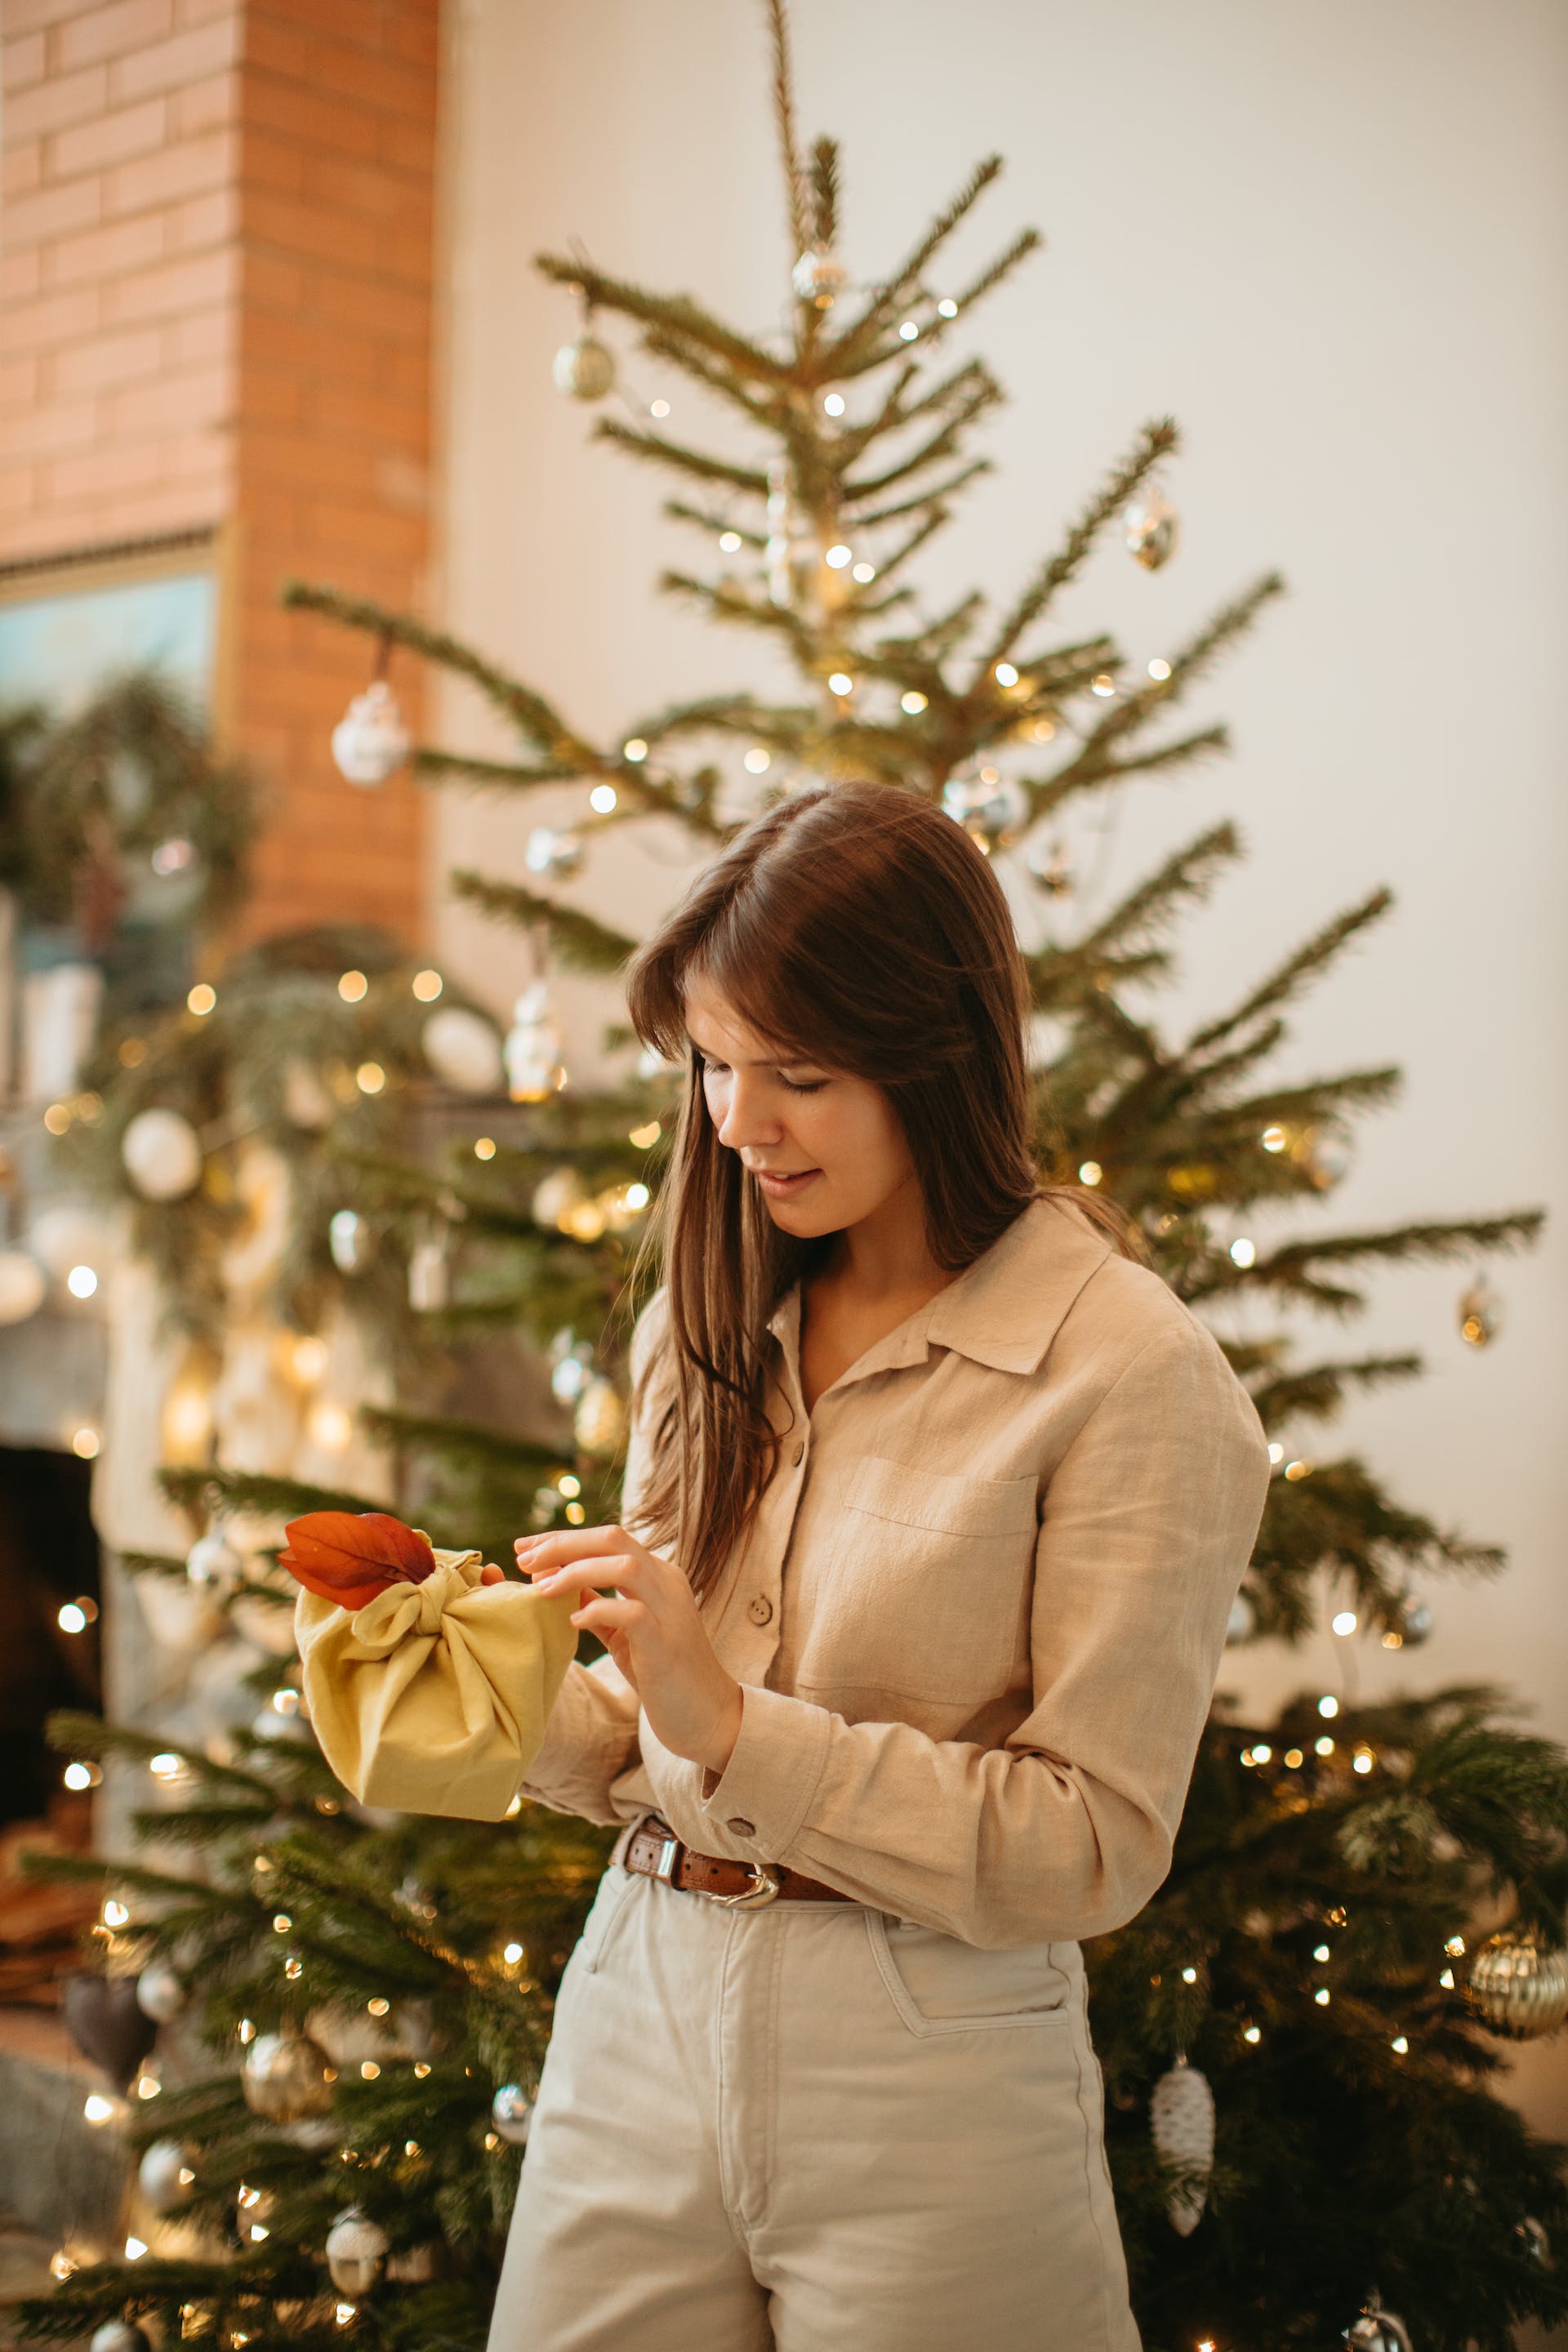 A woman opening her Christmas present | Source: Pexels